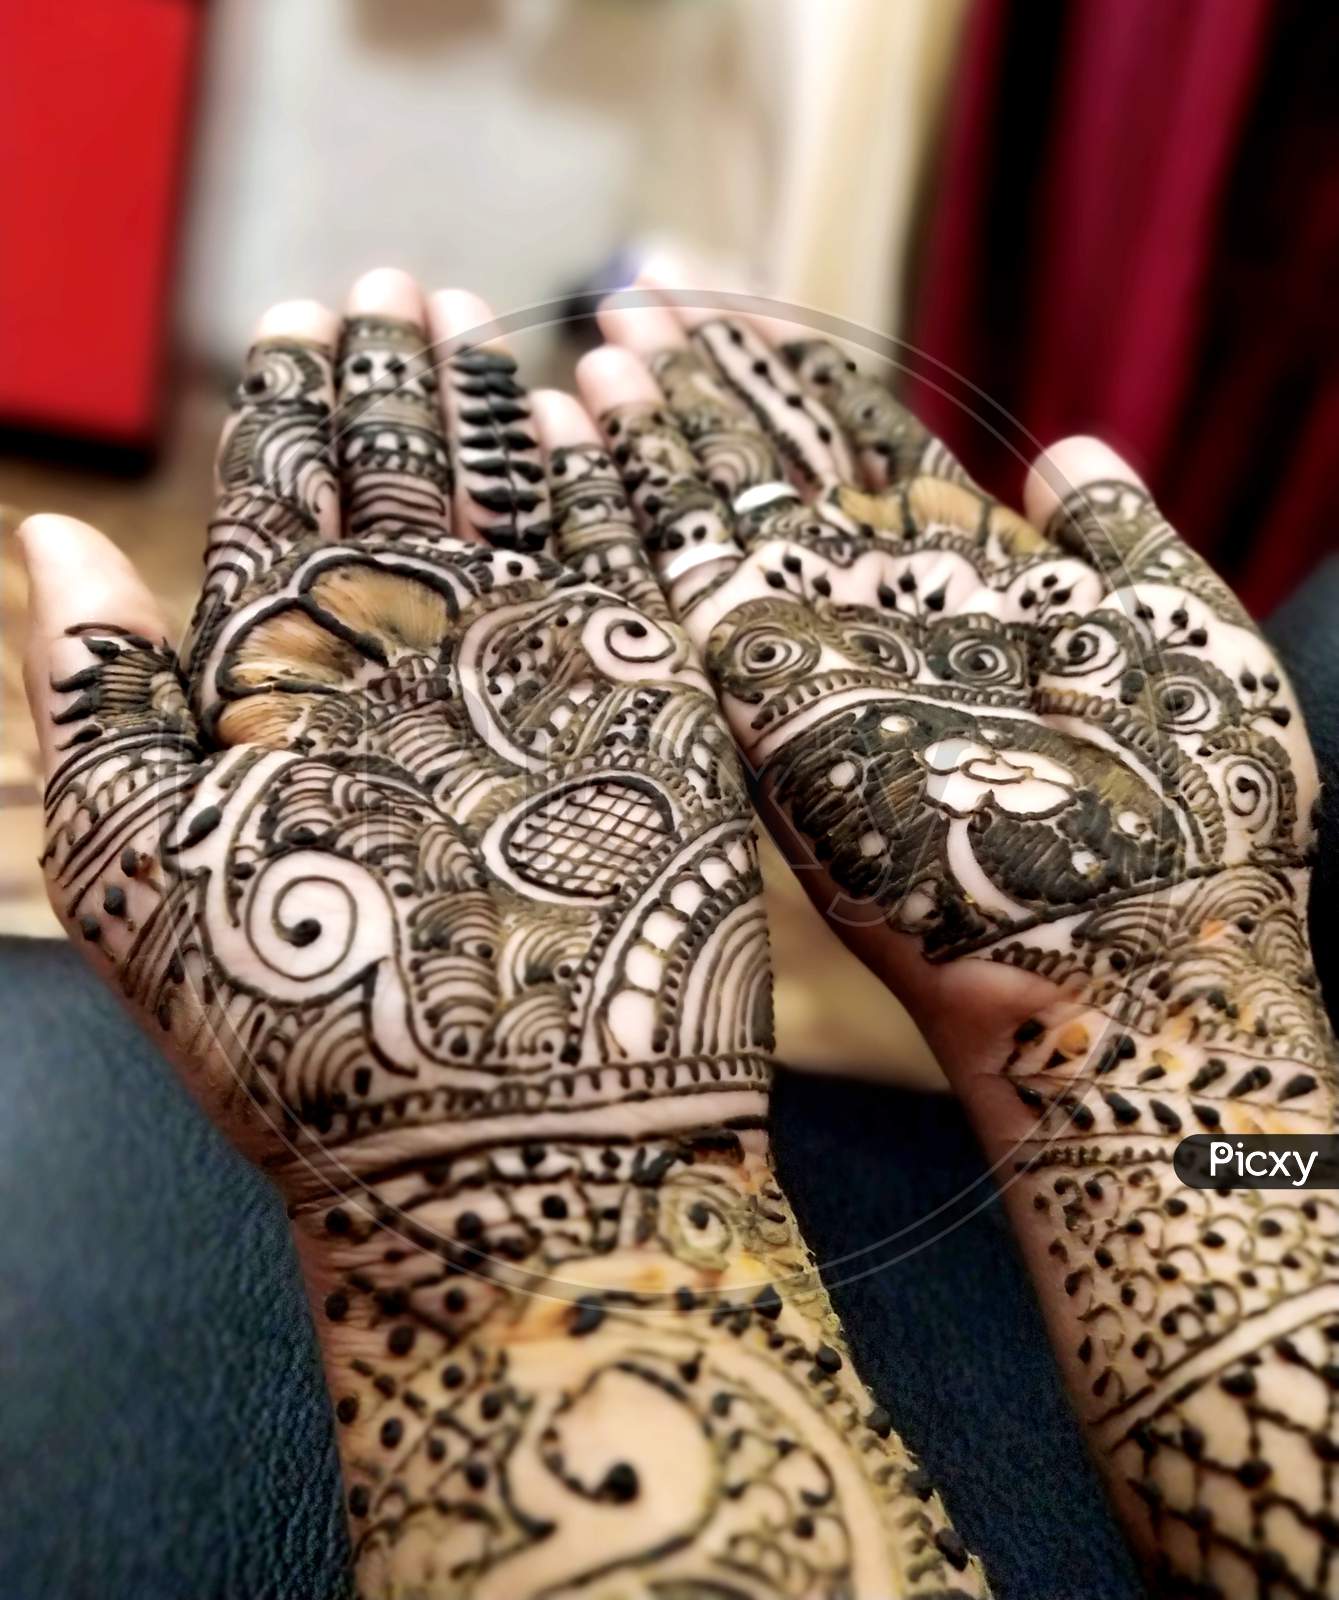 Beautifully Decorated Indian Hands With Mehandi Typically Done For Weddings